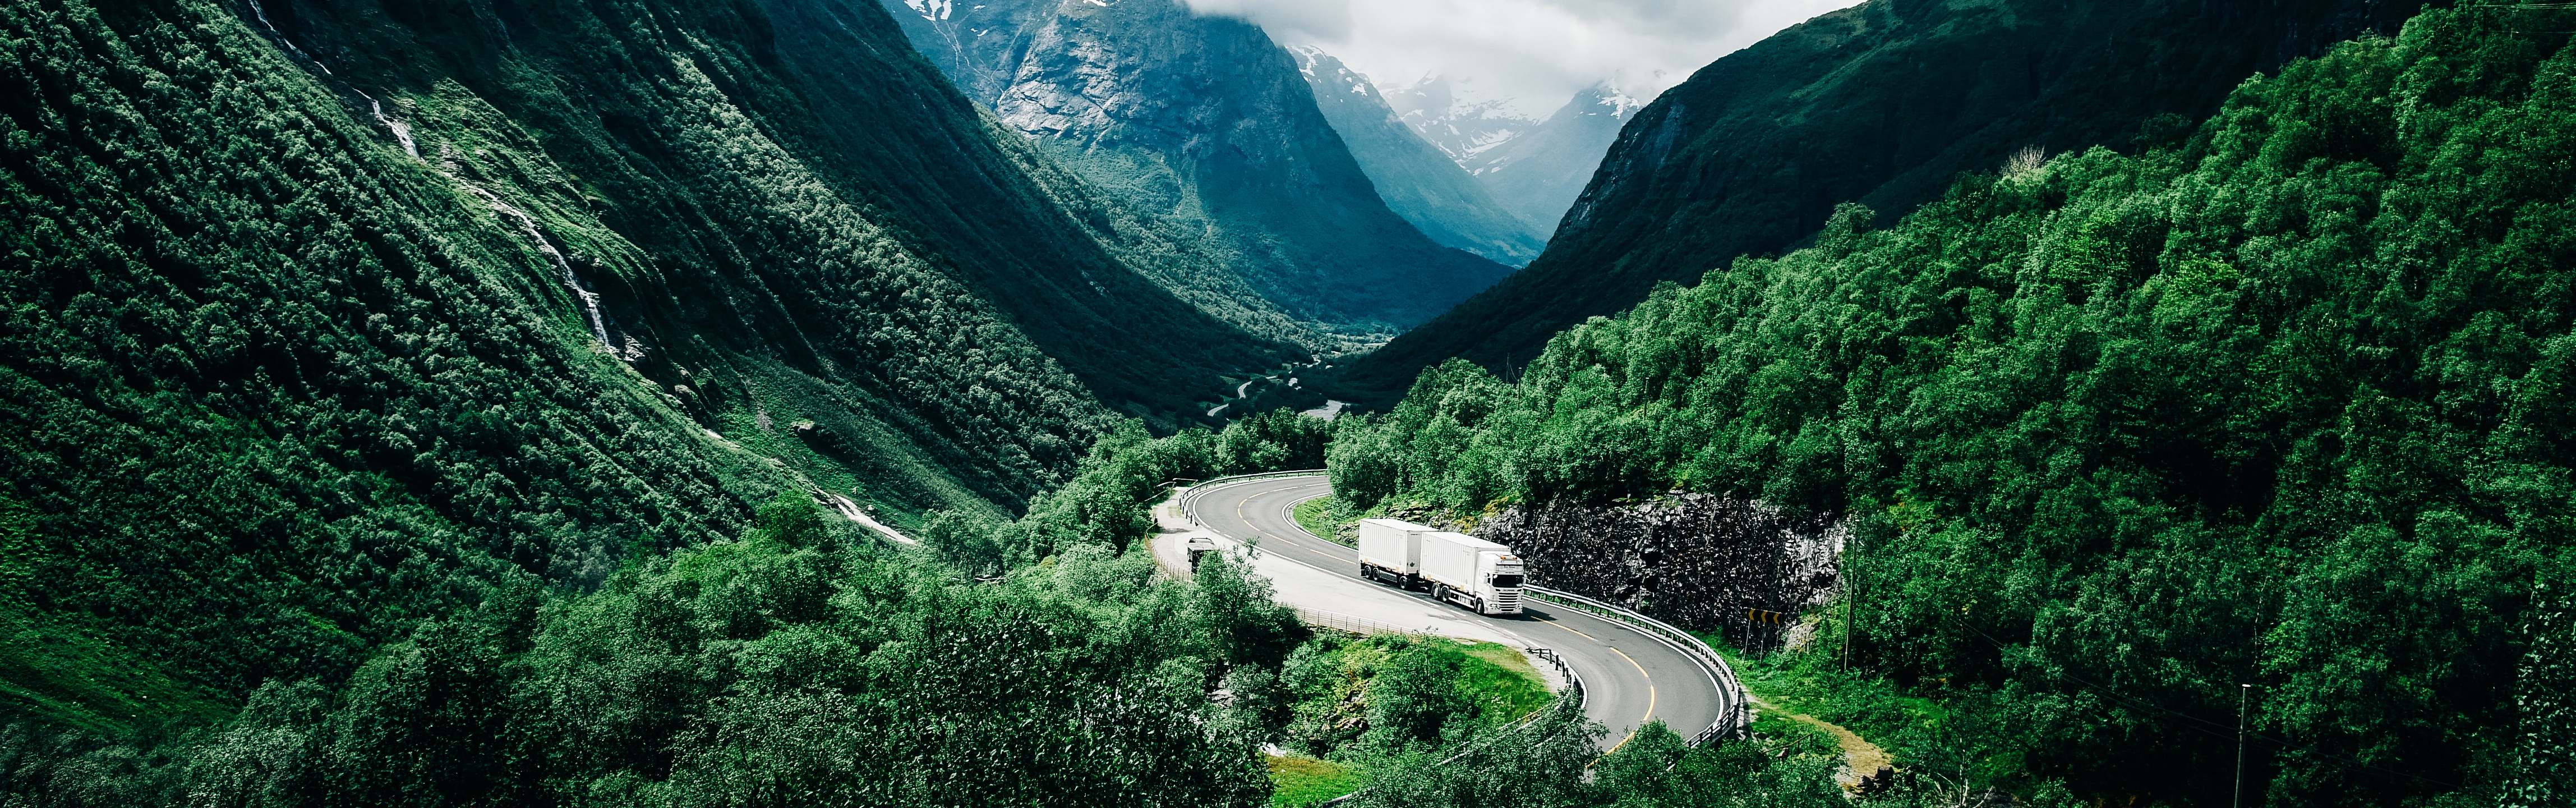 A Volvo truck driving in mountains